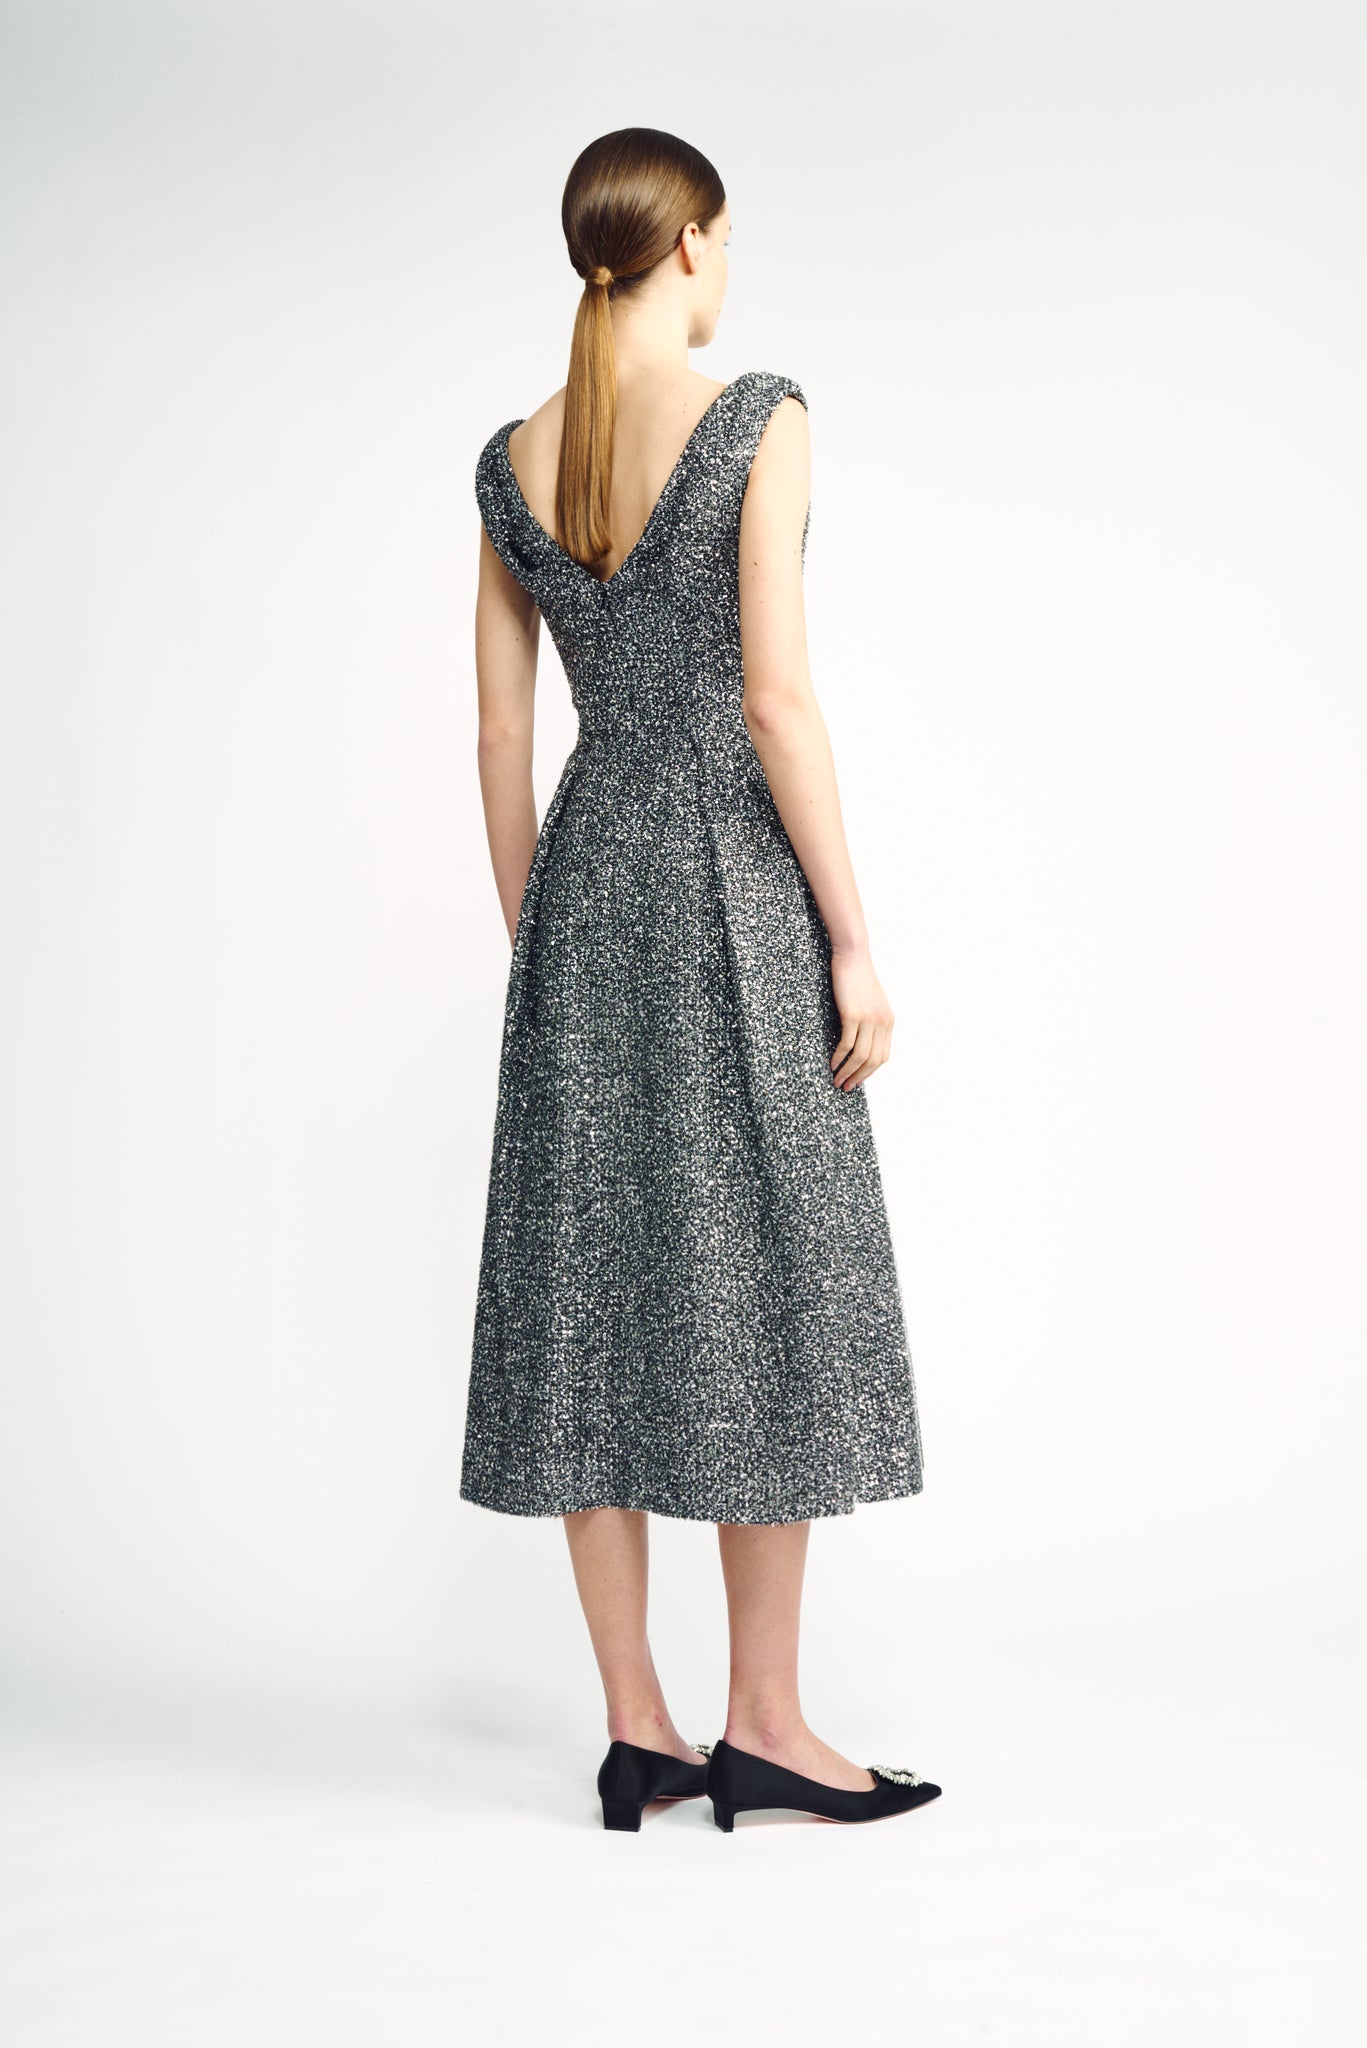 Odelia Dress | Silver Lame Tweed V-Neck Fit-and-Flare Dress | Emilia Wickstead